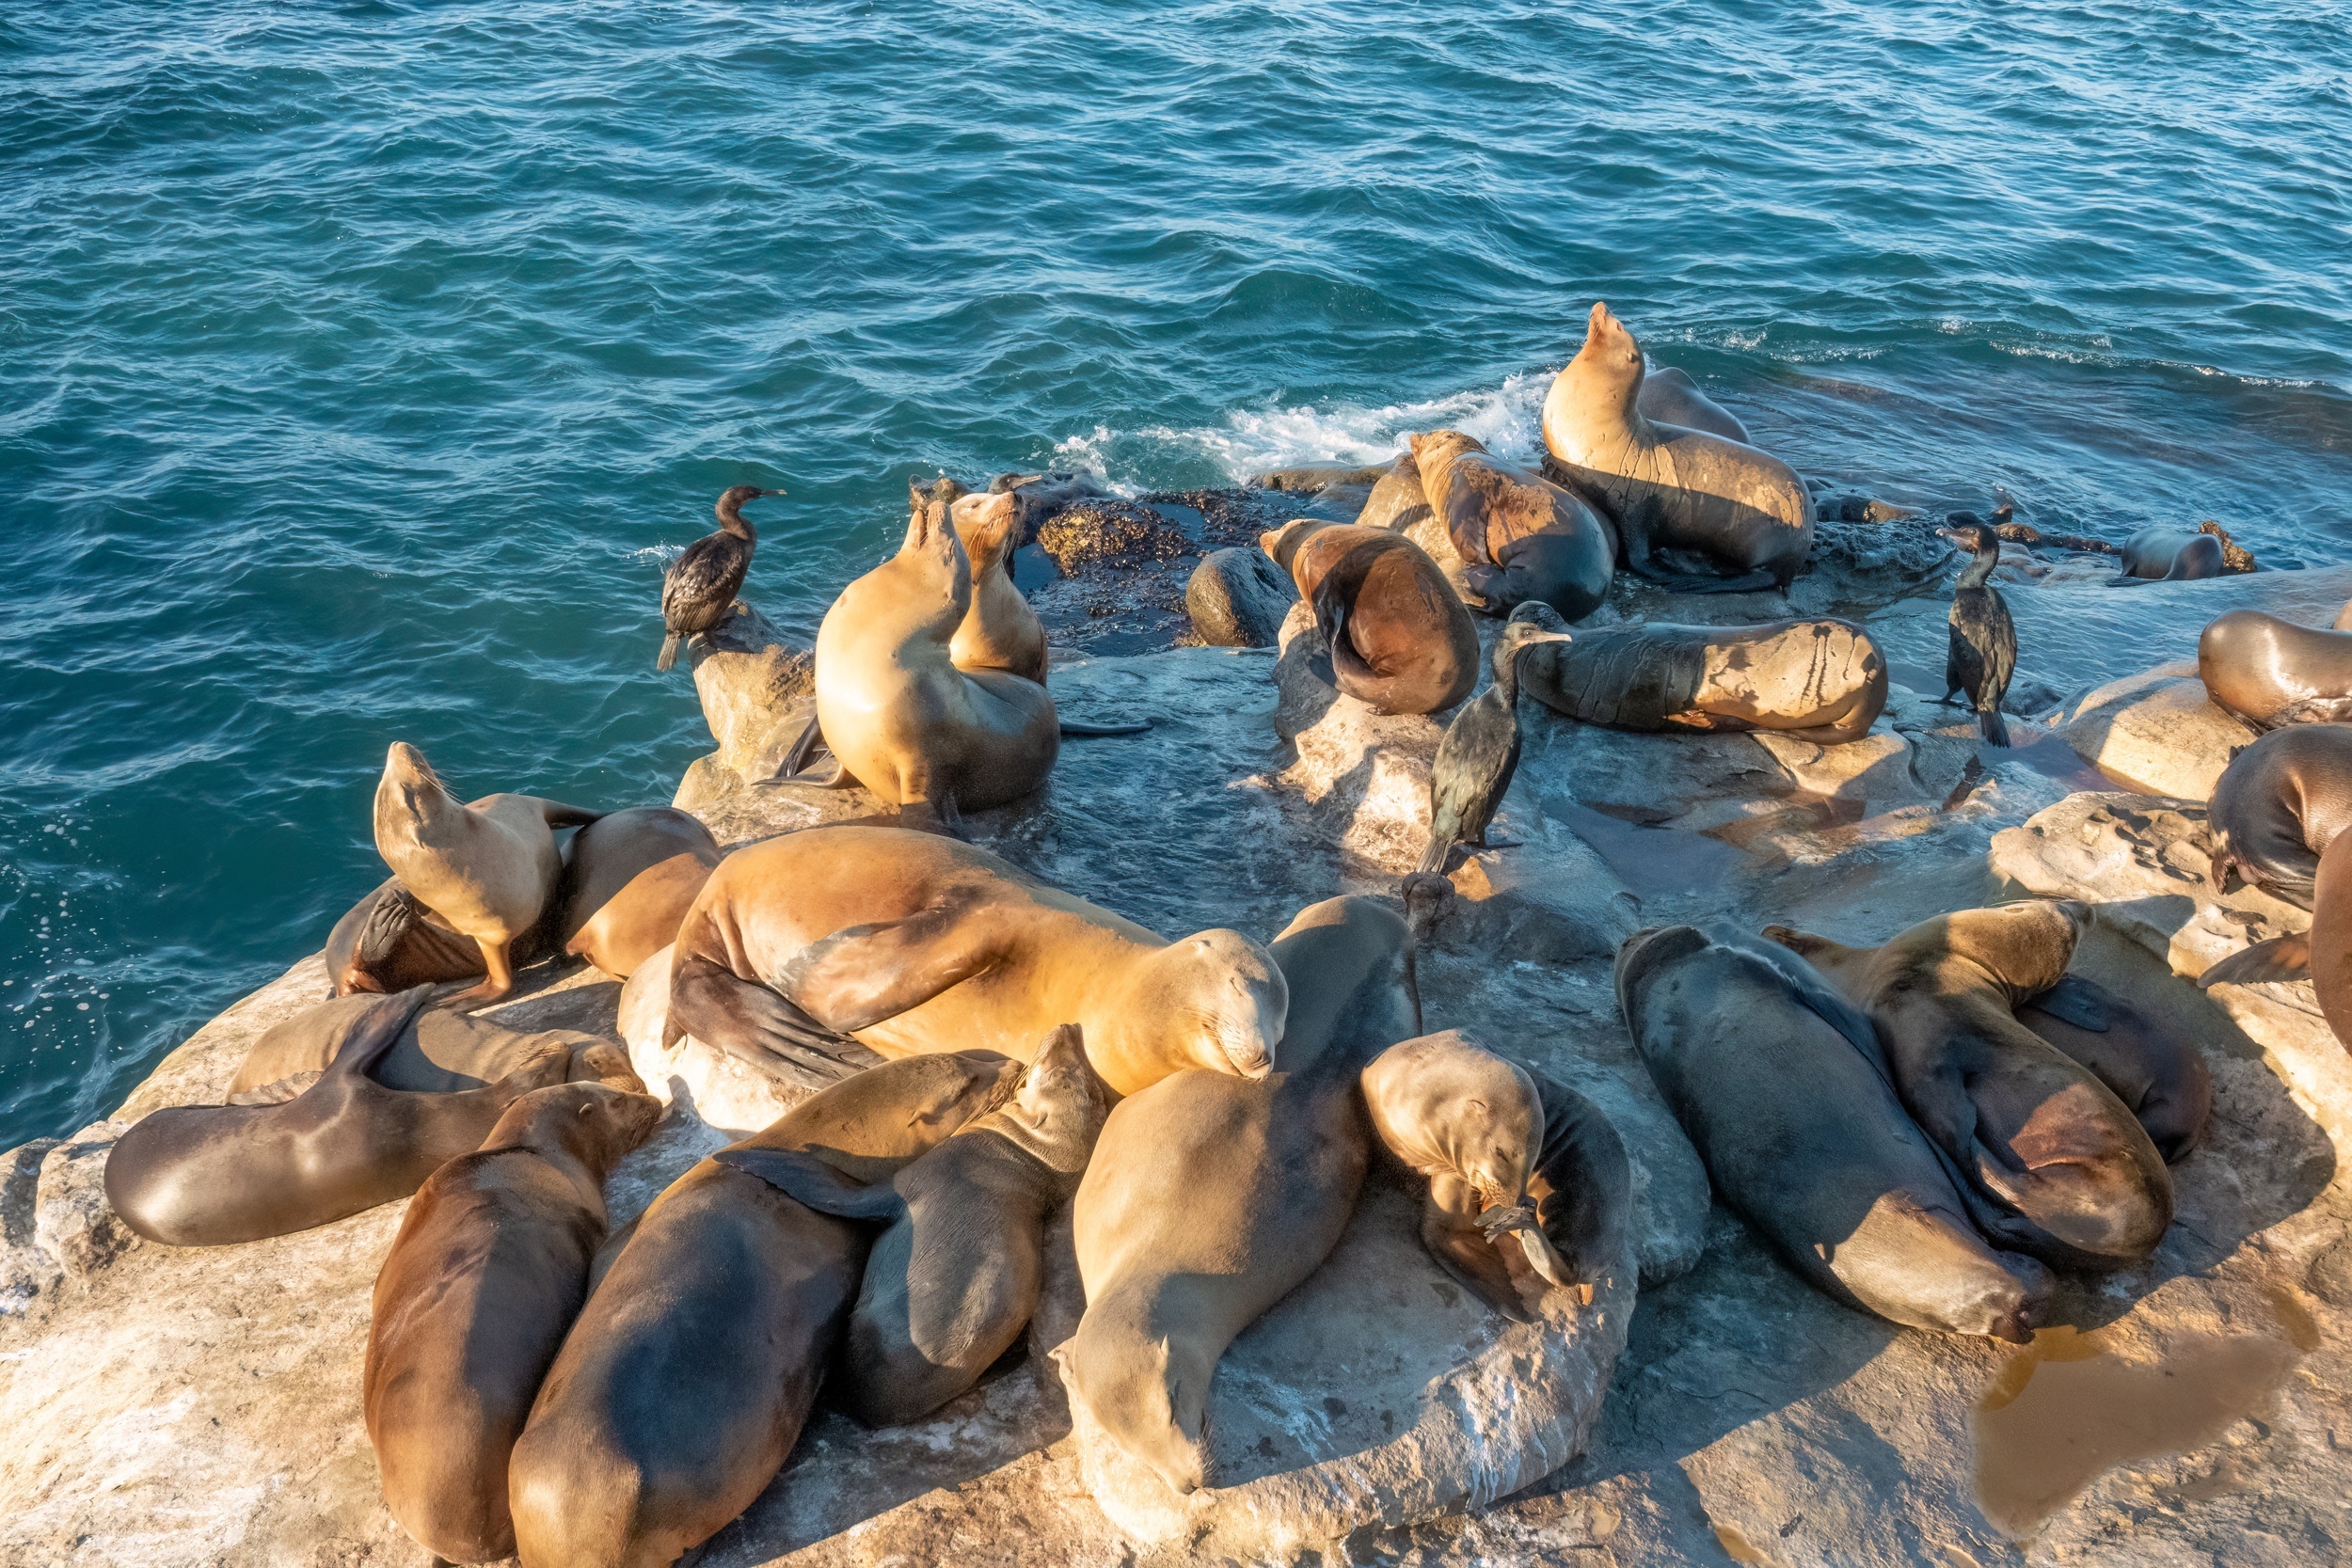 <p>Just outside San Diego is the cute little suburb of La Jolla. Home to a great cove and beach, you can also view sea lions sunbathing on the rocks down by the water most days. Just keep your distance, as they aren’t necessarily friendly.</p><p><a href='https://www.msn.com/en-us/community/channel/vid-cj9pqbr0vn9in2b6ddcd8sfgpfq6x6utp44fssrv6mc2gtybw0us'>Did you enjoy this slideshow? Follow us on MSN to see more of our exclusive lifestyle content.</a></p>